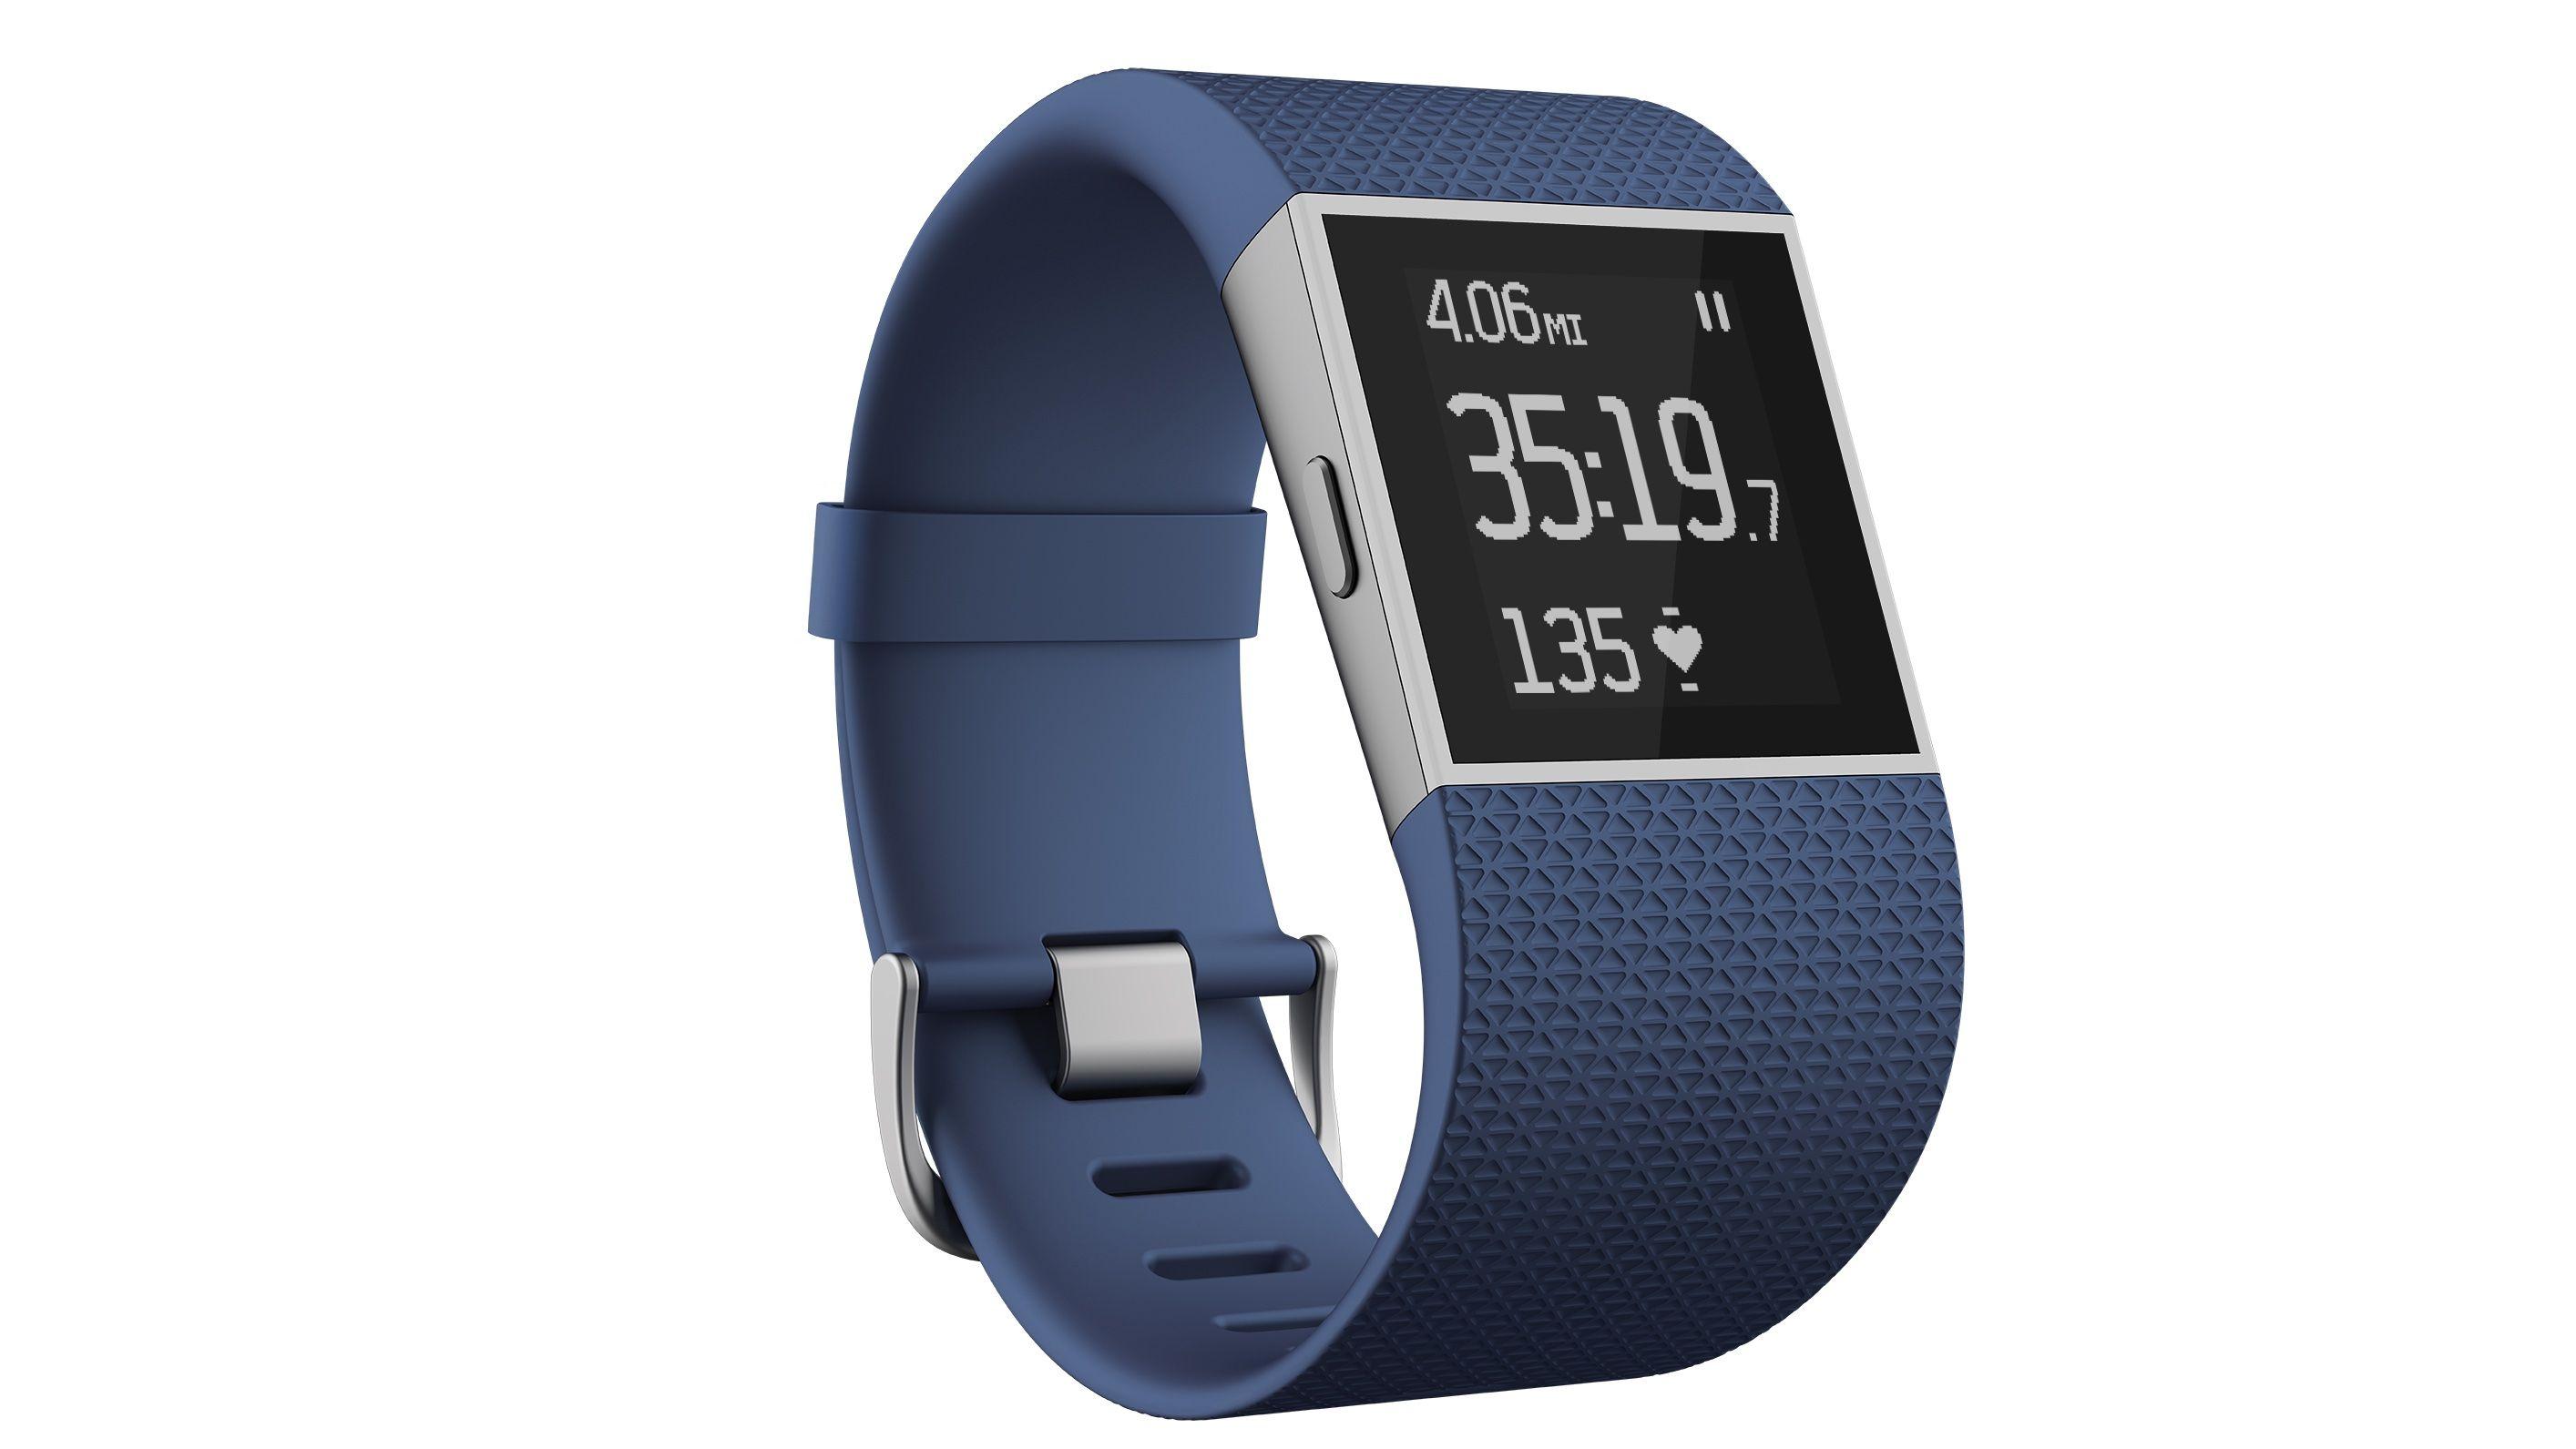 FITBIT SURGE Photo, Image and Wallpaper